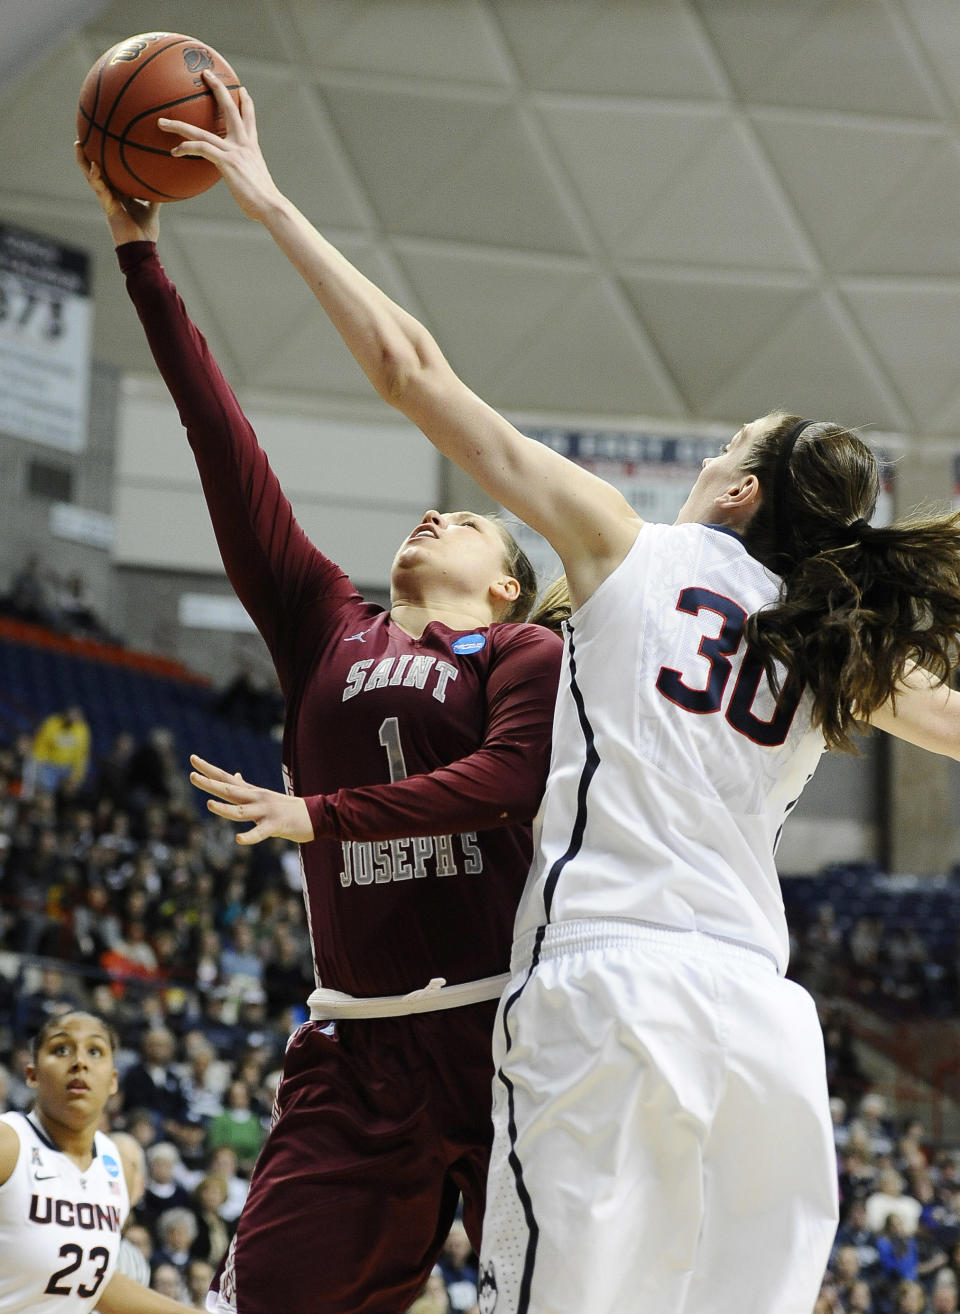 Connecticut's Breanna Stewart, right, blocks a shot attempt by Saint Joseph's Ilze Gotfrida, left, during the first half of a second-round game of the NCAA women's college basketball tournament, Tuesday, March 25, 2014, in Storrs, Conn. (AP Photo/Jessica Hill)